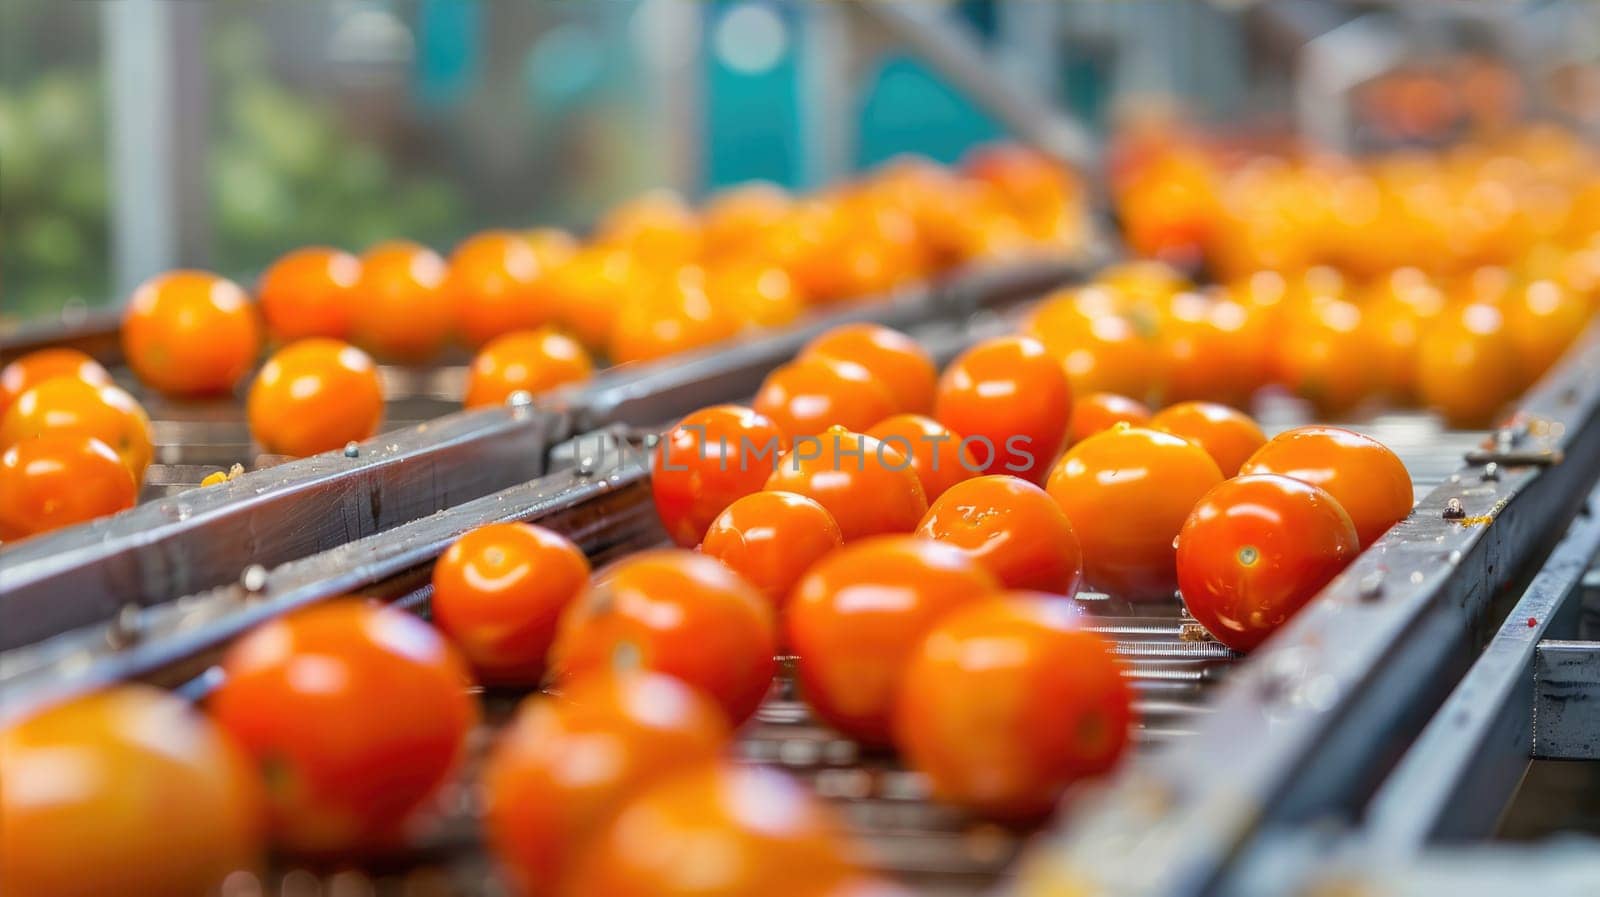 Plum tomatoes on conveyor belt in food factory processing plant by natali_brill